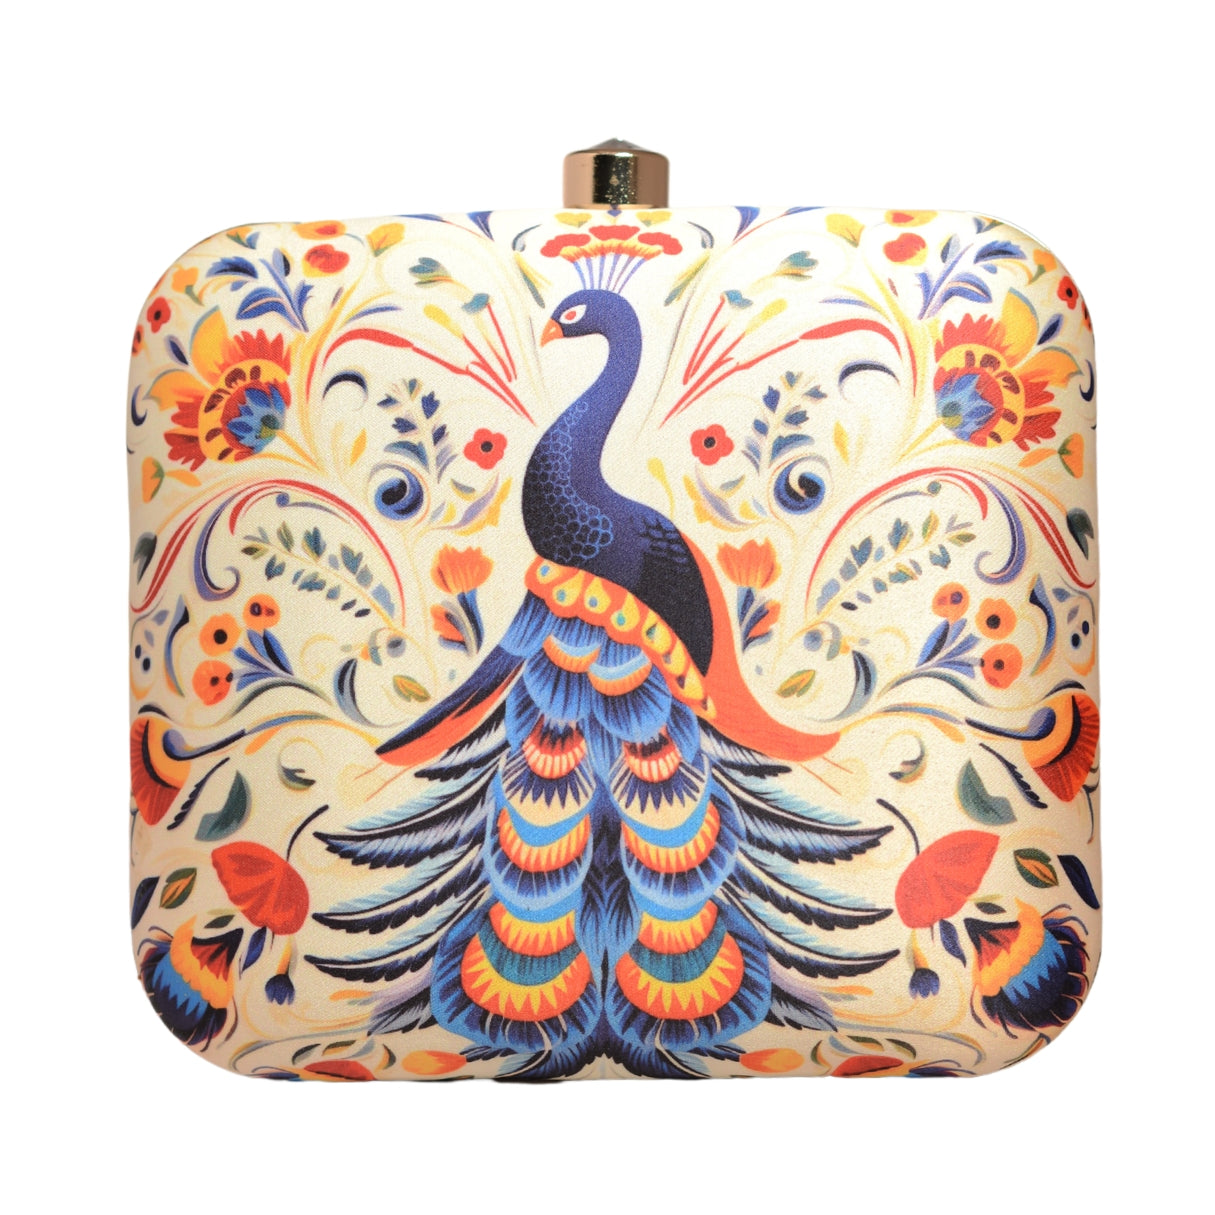 White Based Peacock Printed Clutch